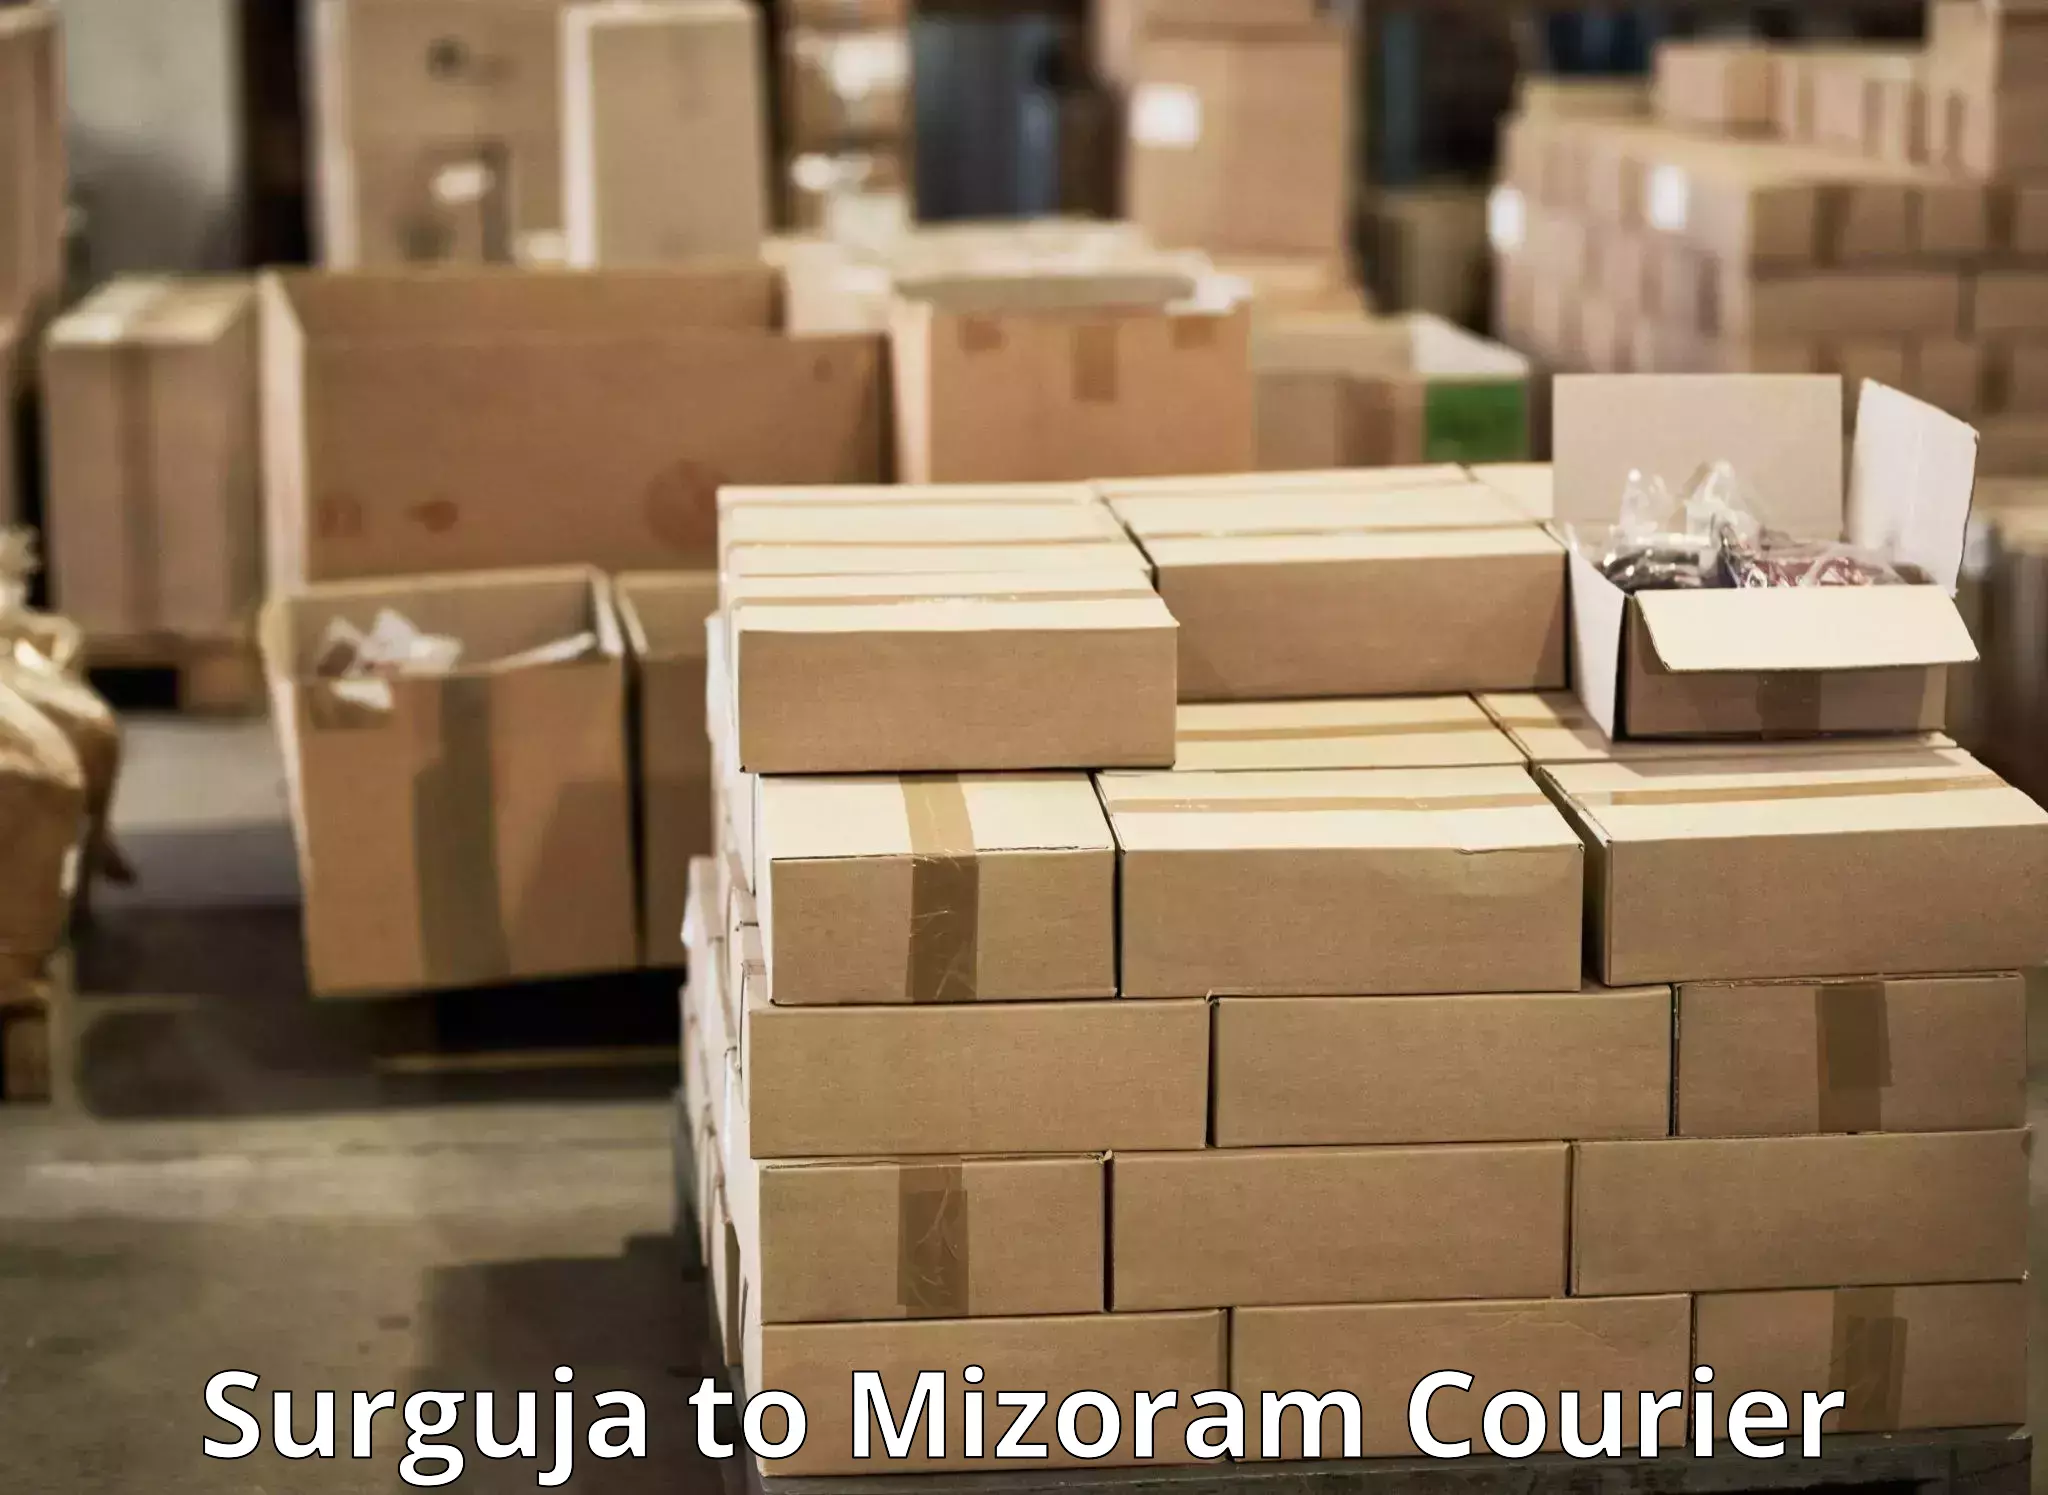 Express delivery solutions Surguja to Mizoram